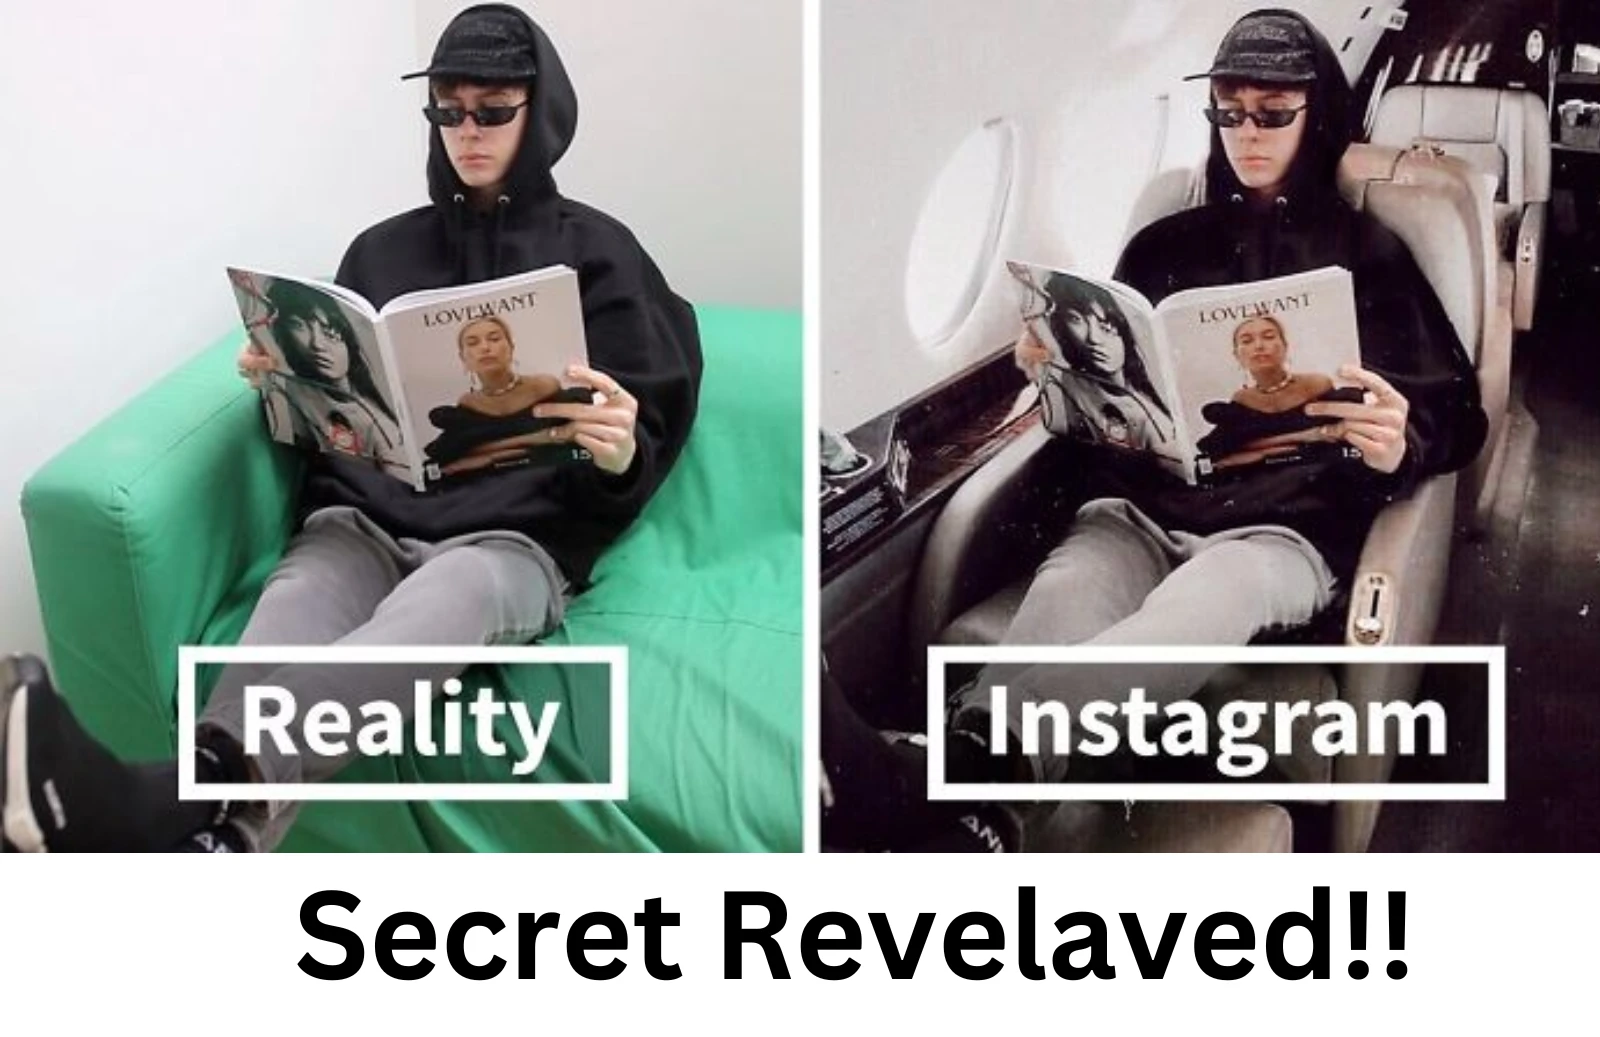 Behind Closed Doors: The Real Lives of Instagram Influencers